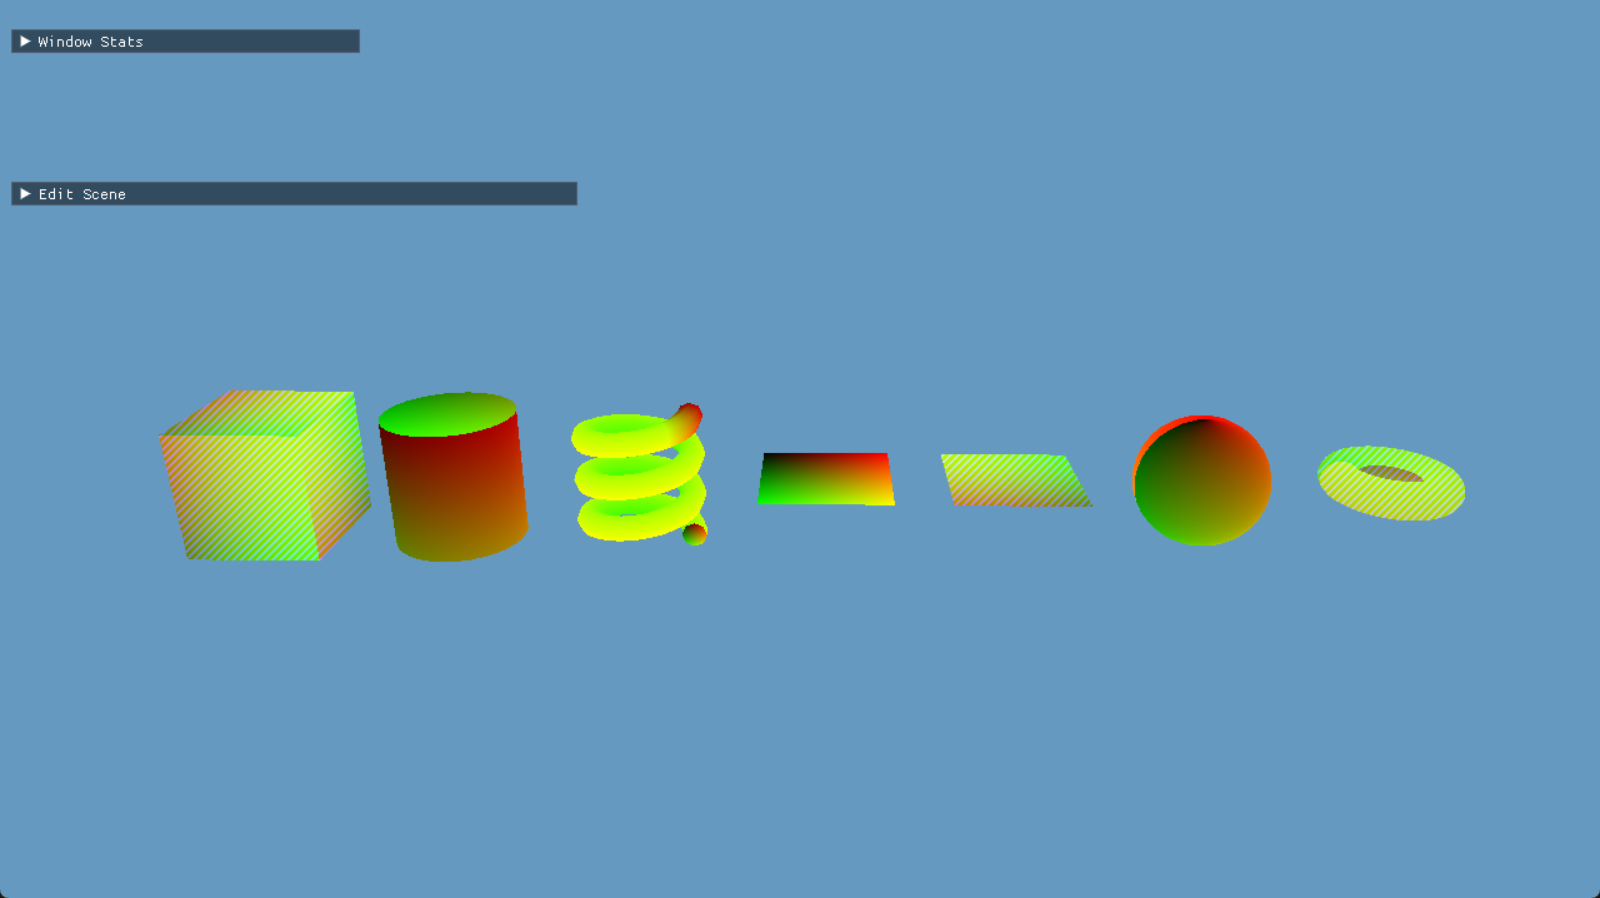 Render of 3D models of different shapes with their normals displayed